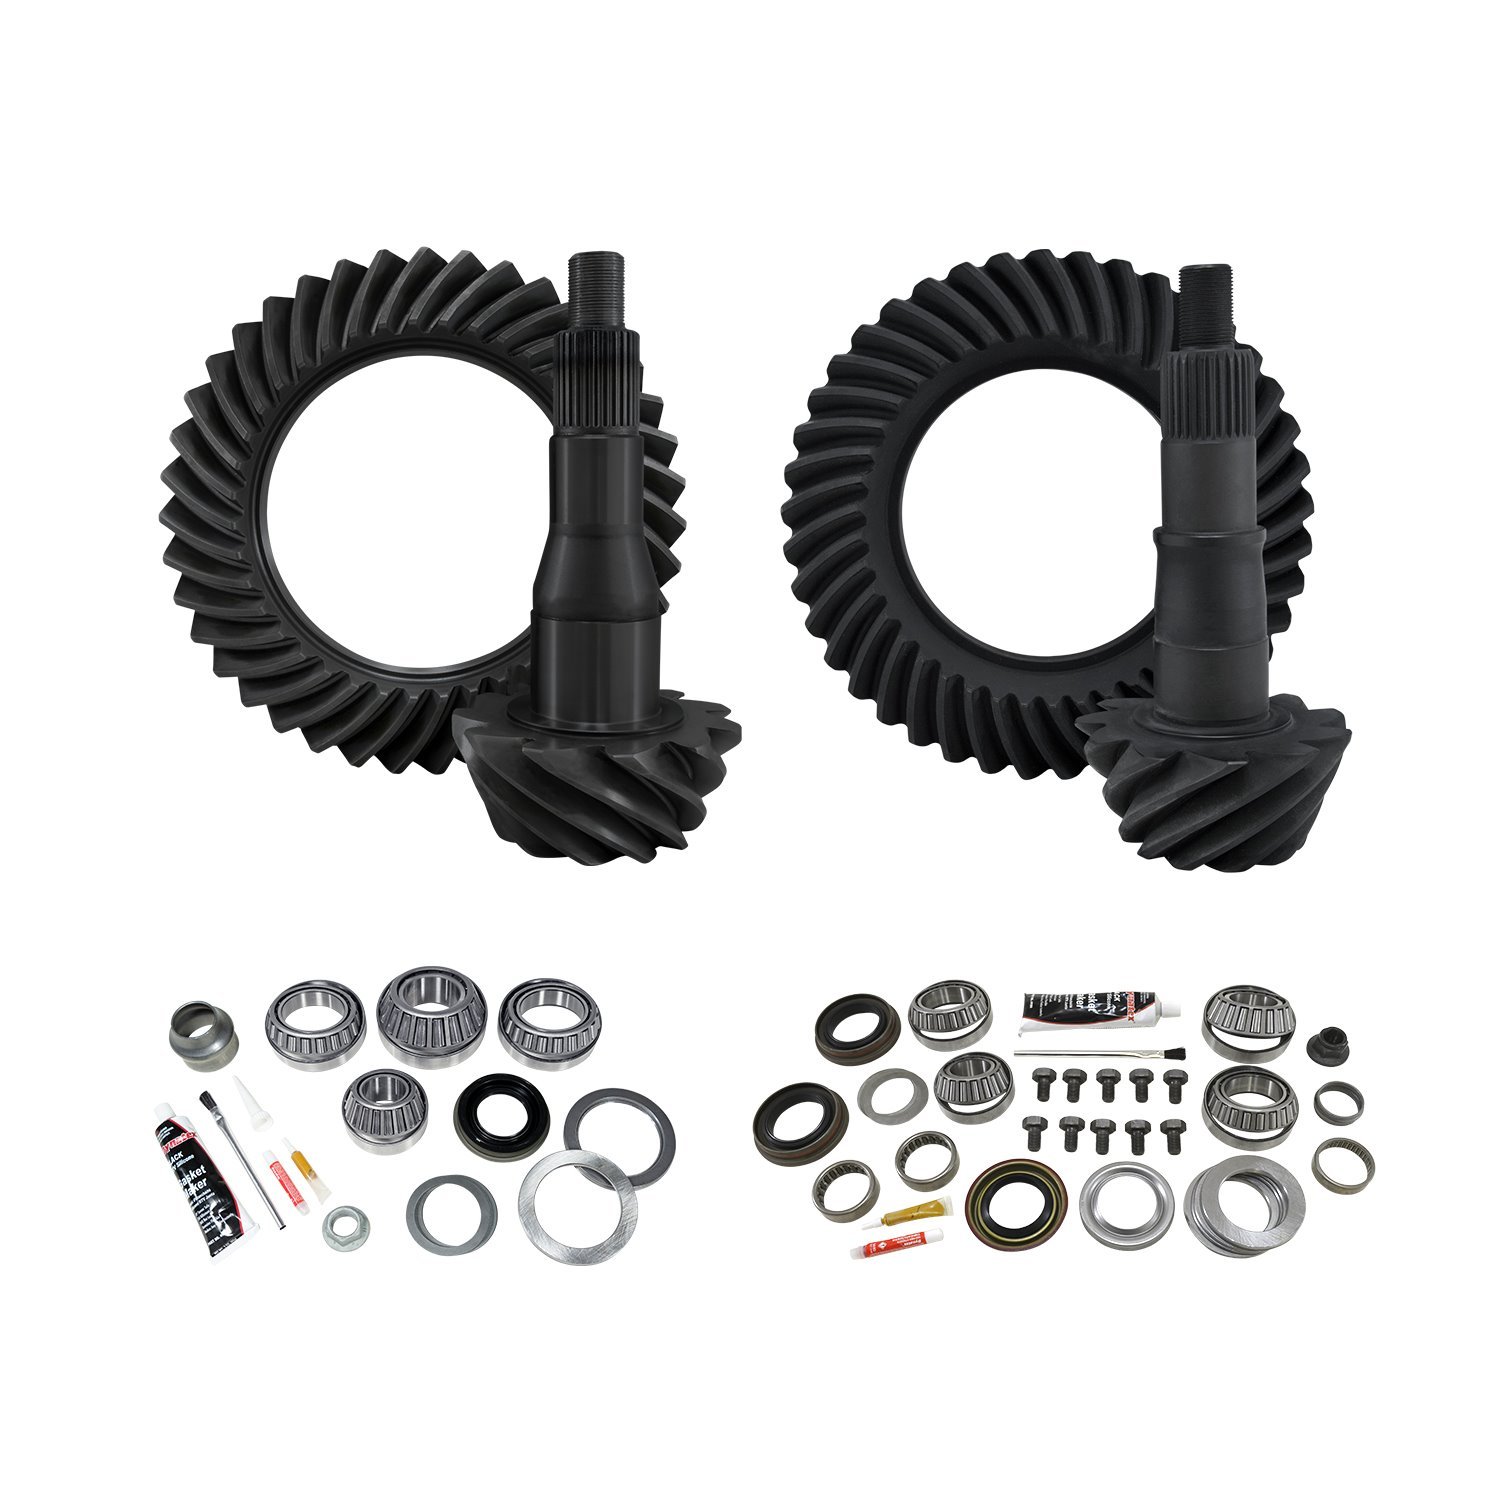 Re-Gear & Installation Kit, Ford 9.75 in., Various F150, 4.88 Ratio, Fr&Rr